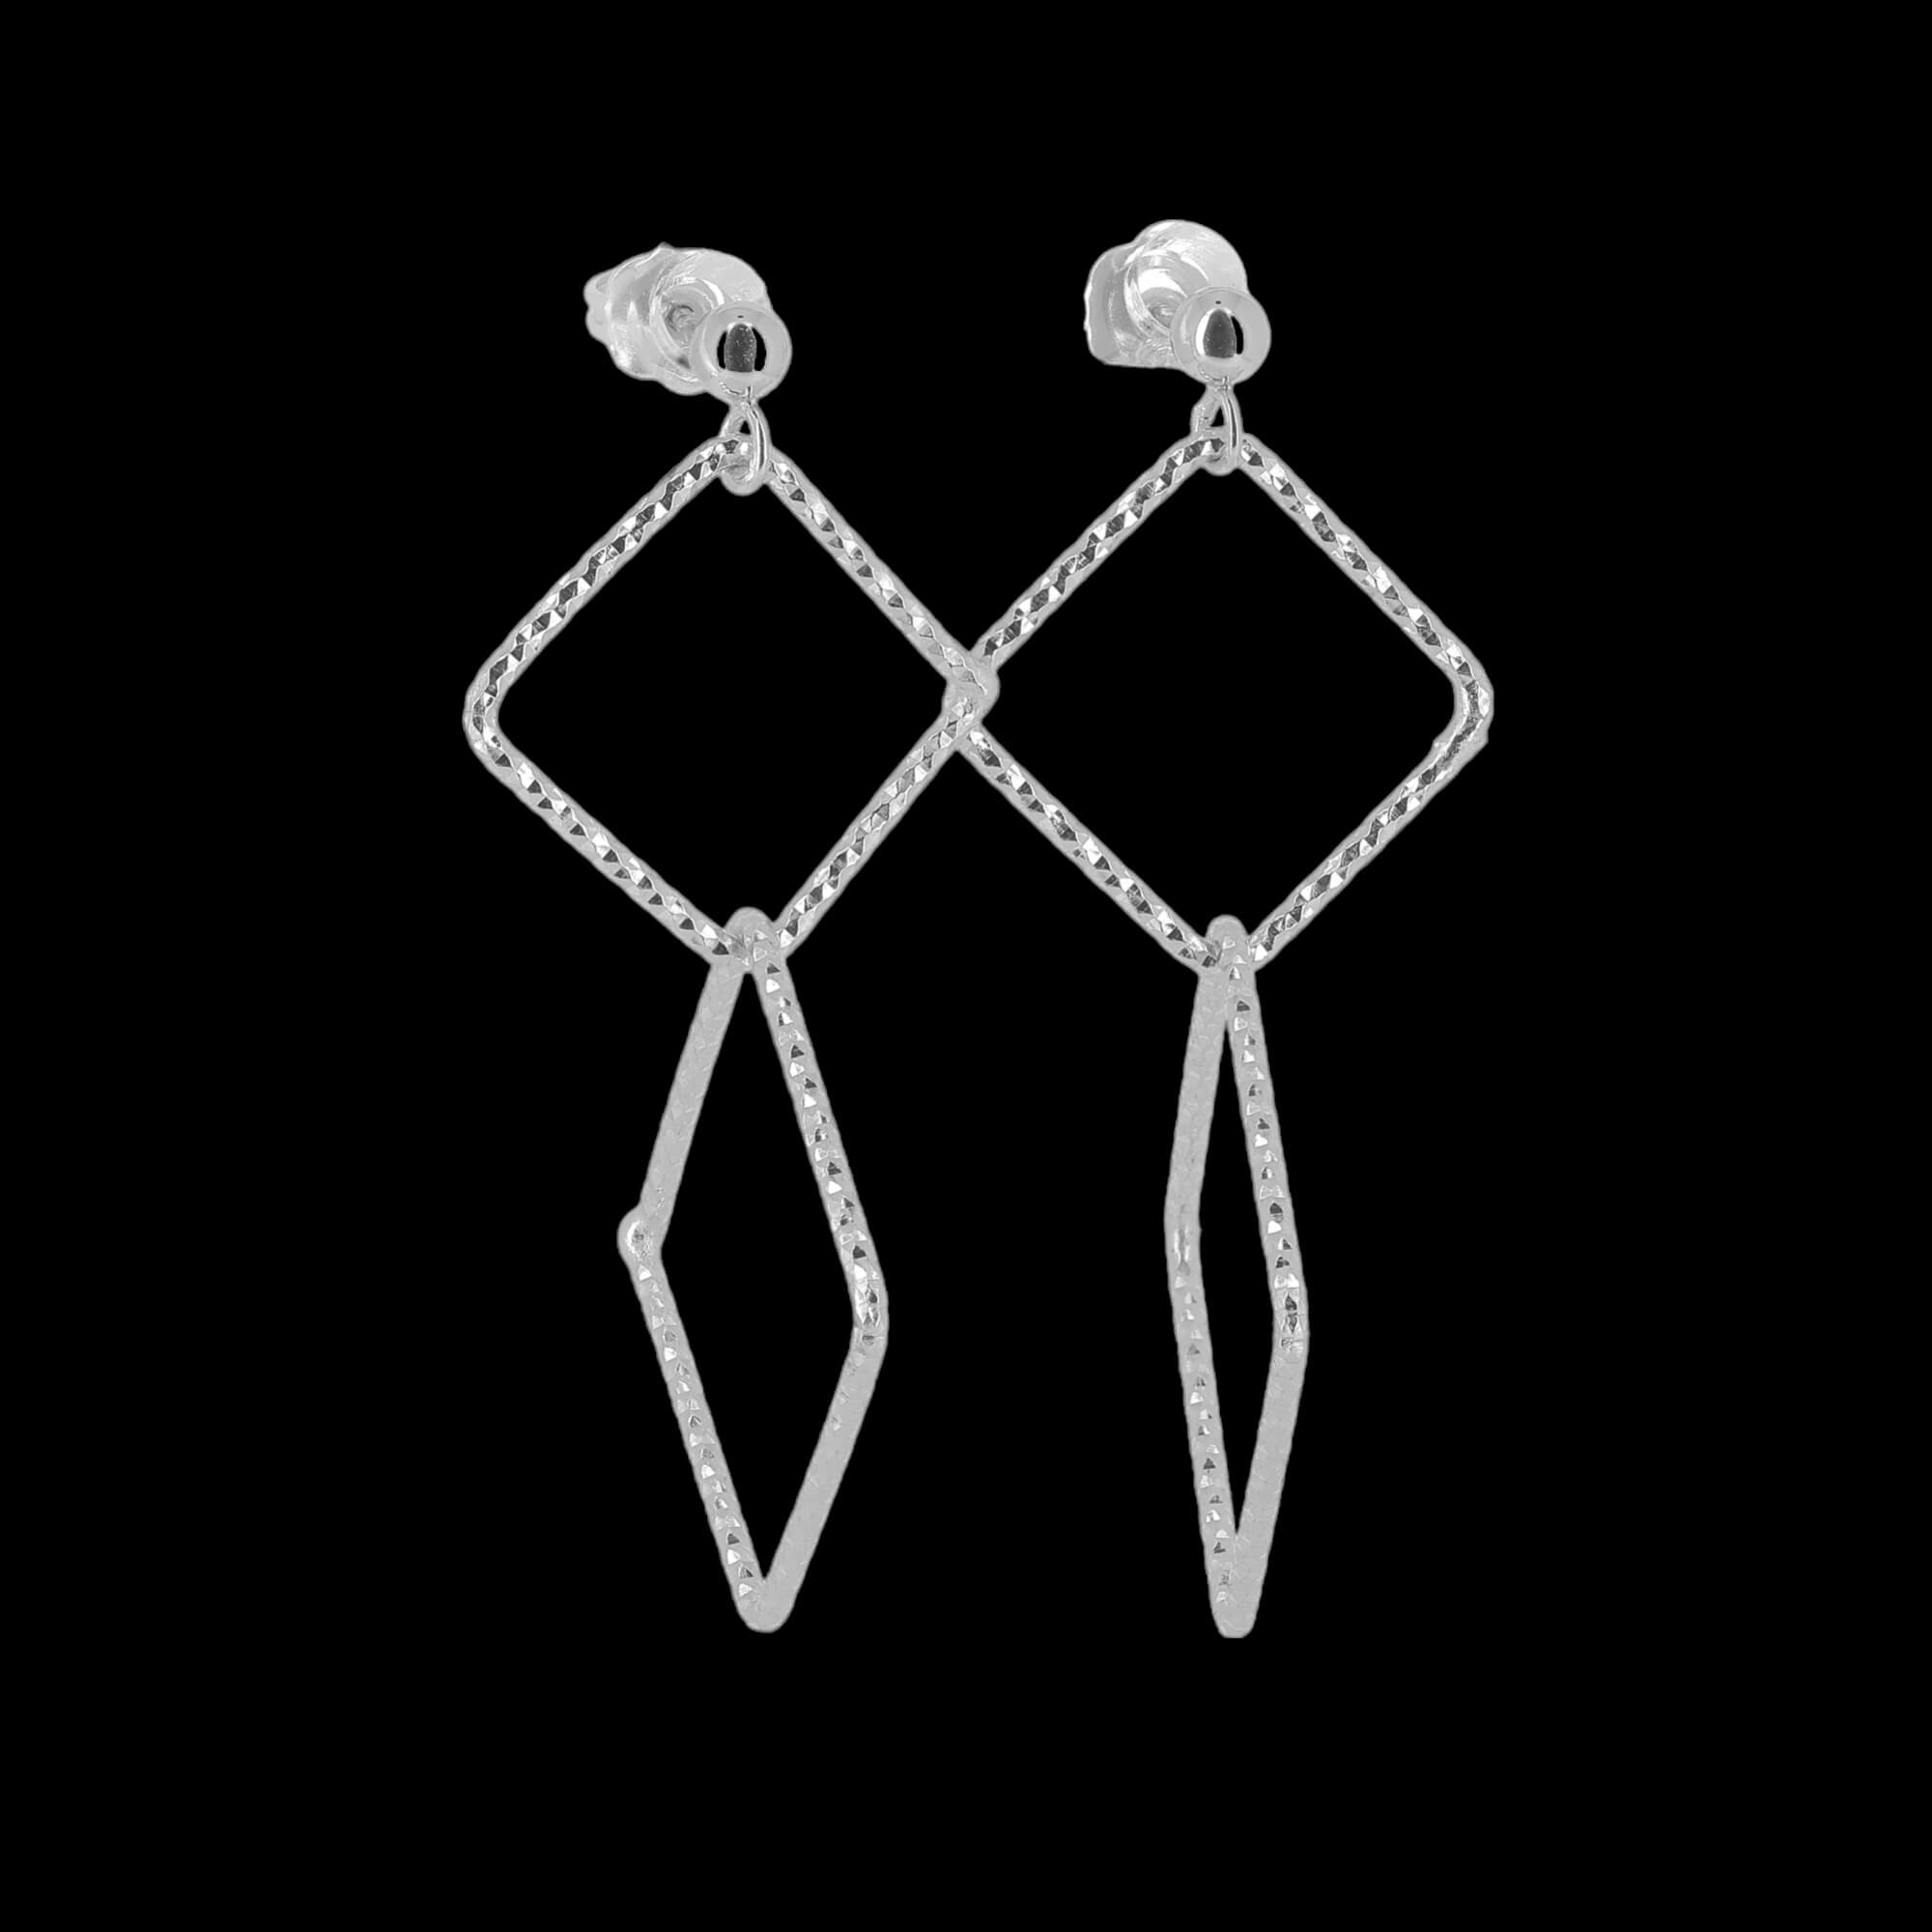 Silver earrings with two open squares